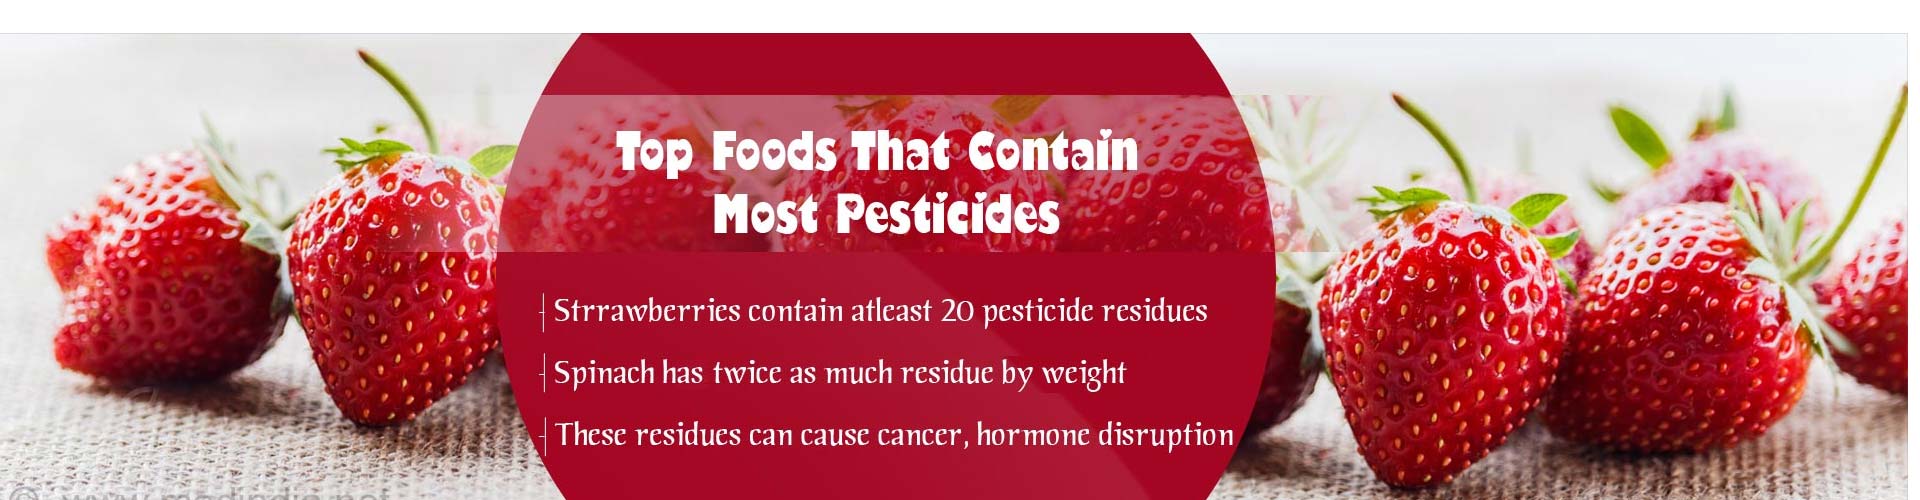 Top Foods That Contain Most Pesticides
- Strawberries contain atleast 20 pesticide residues
- Spinach have twice as much residue by weight
- These residues can cause cancer, hormone disruption